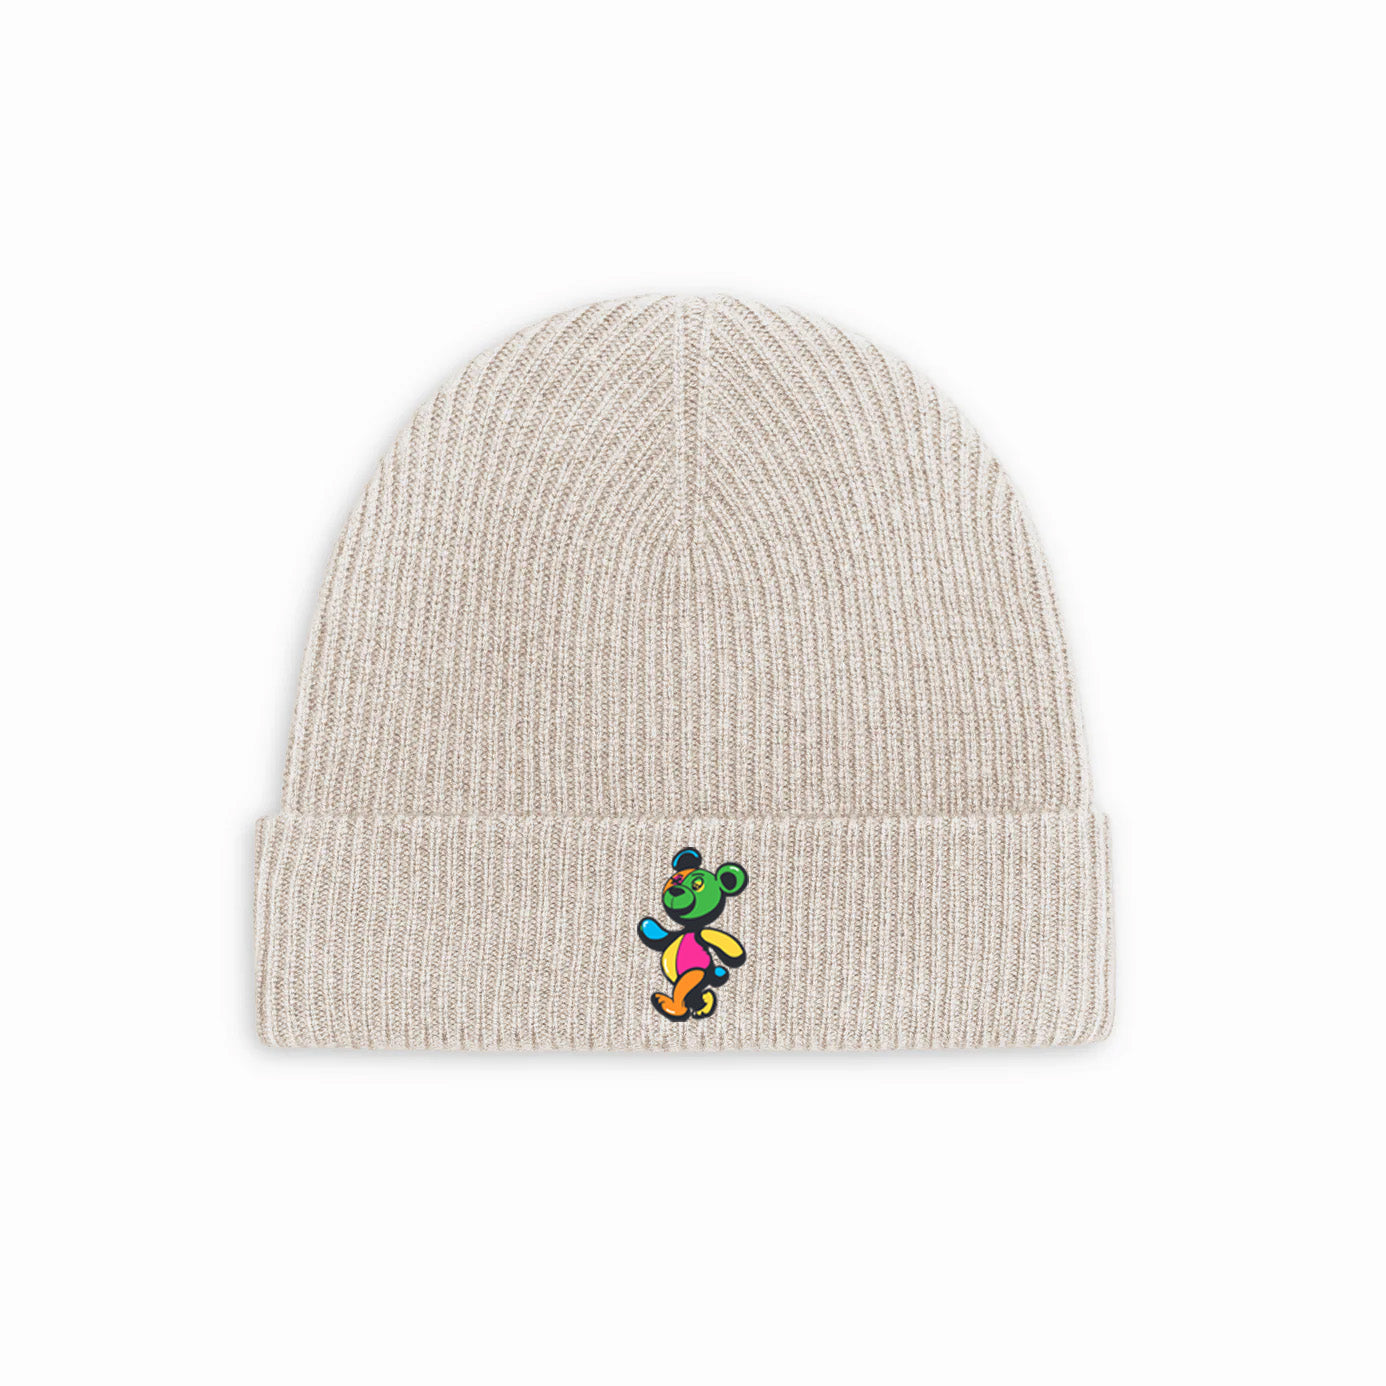 My Edible Kicked In Bears Dem Suga Embroidered Cashmere Wool Beanie